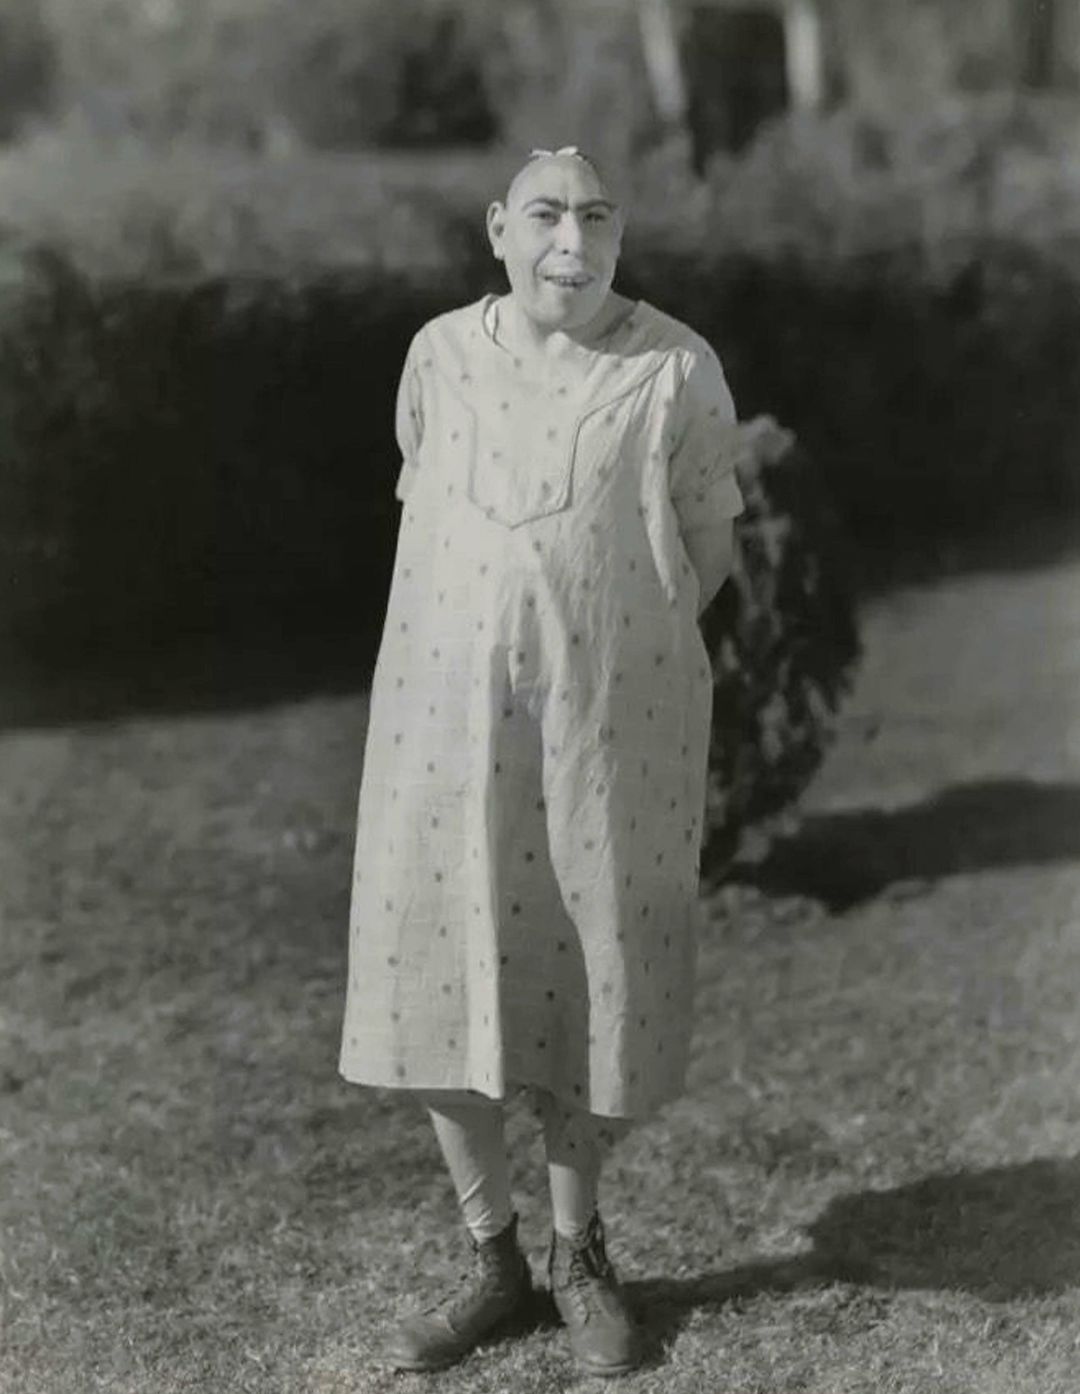 Schlitzie was a famous American sideshow performer who appeared in the 1932 movie Freaks and lived into her 80s. Fans still visit her grave.